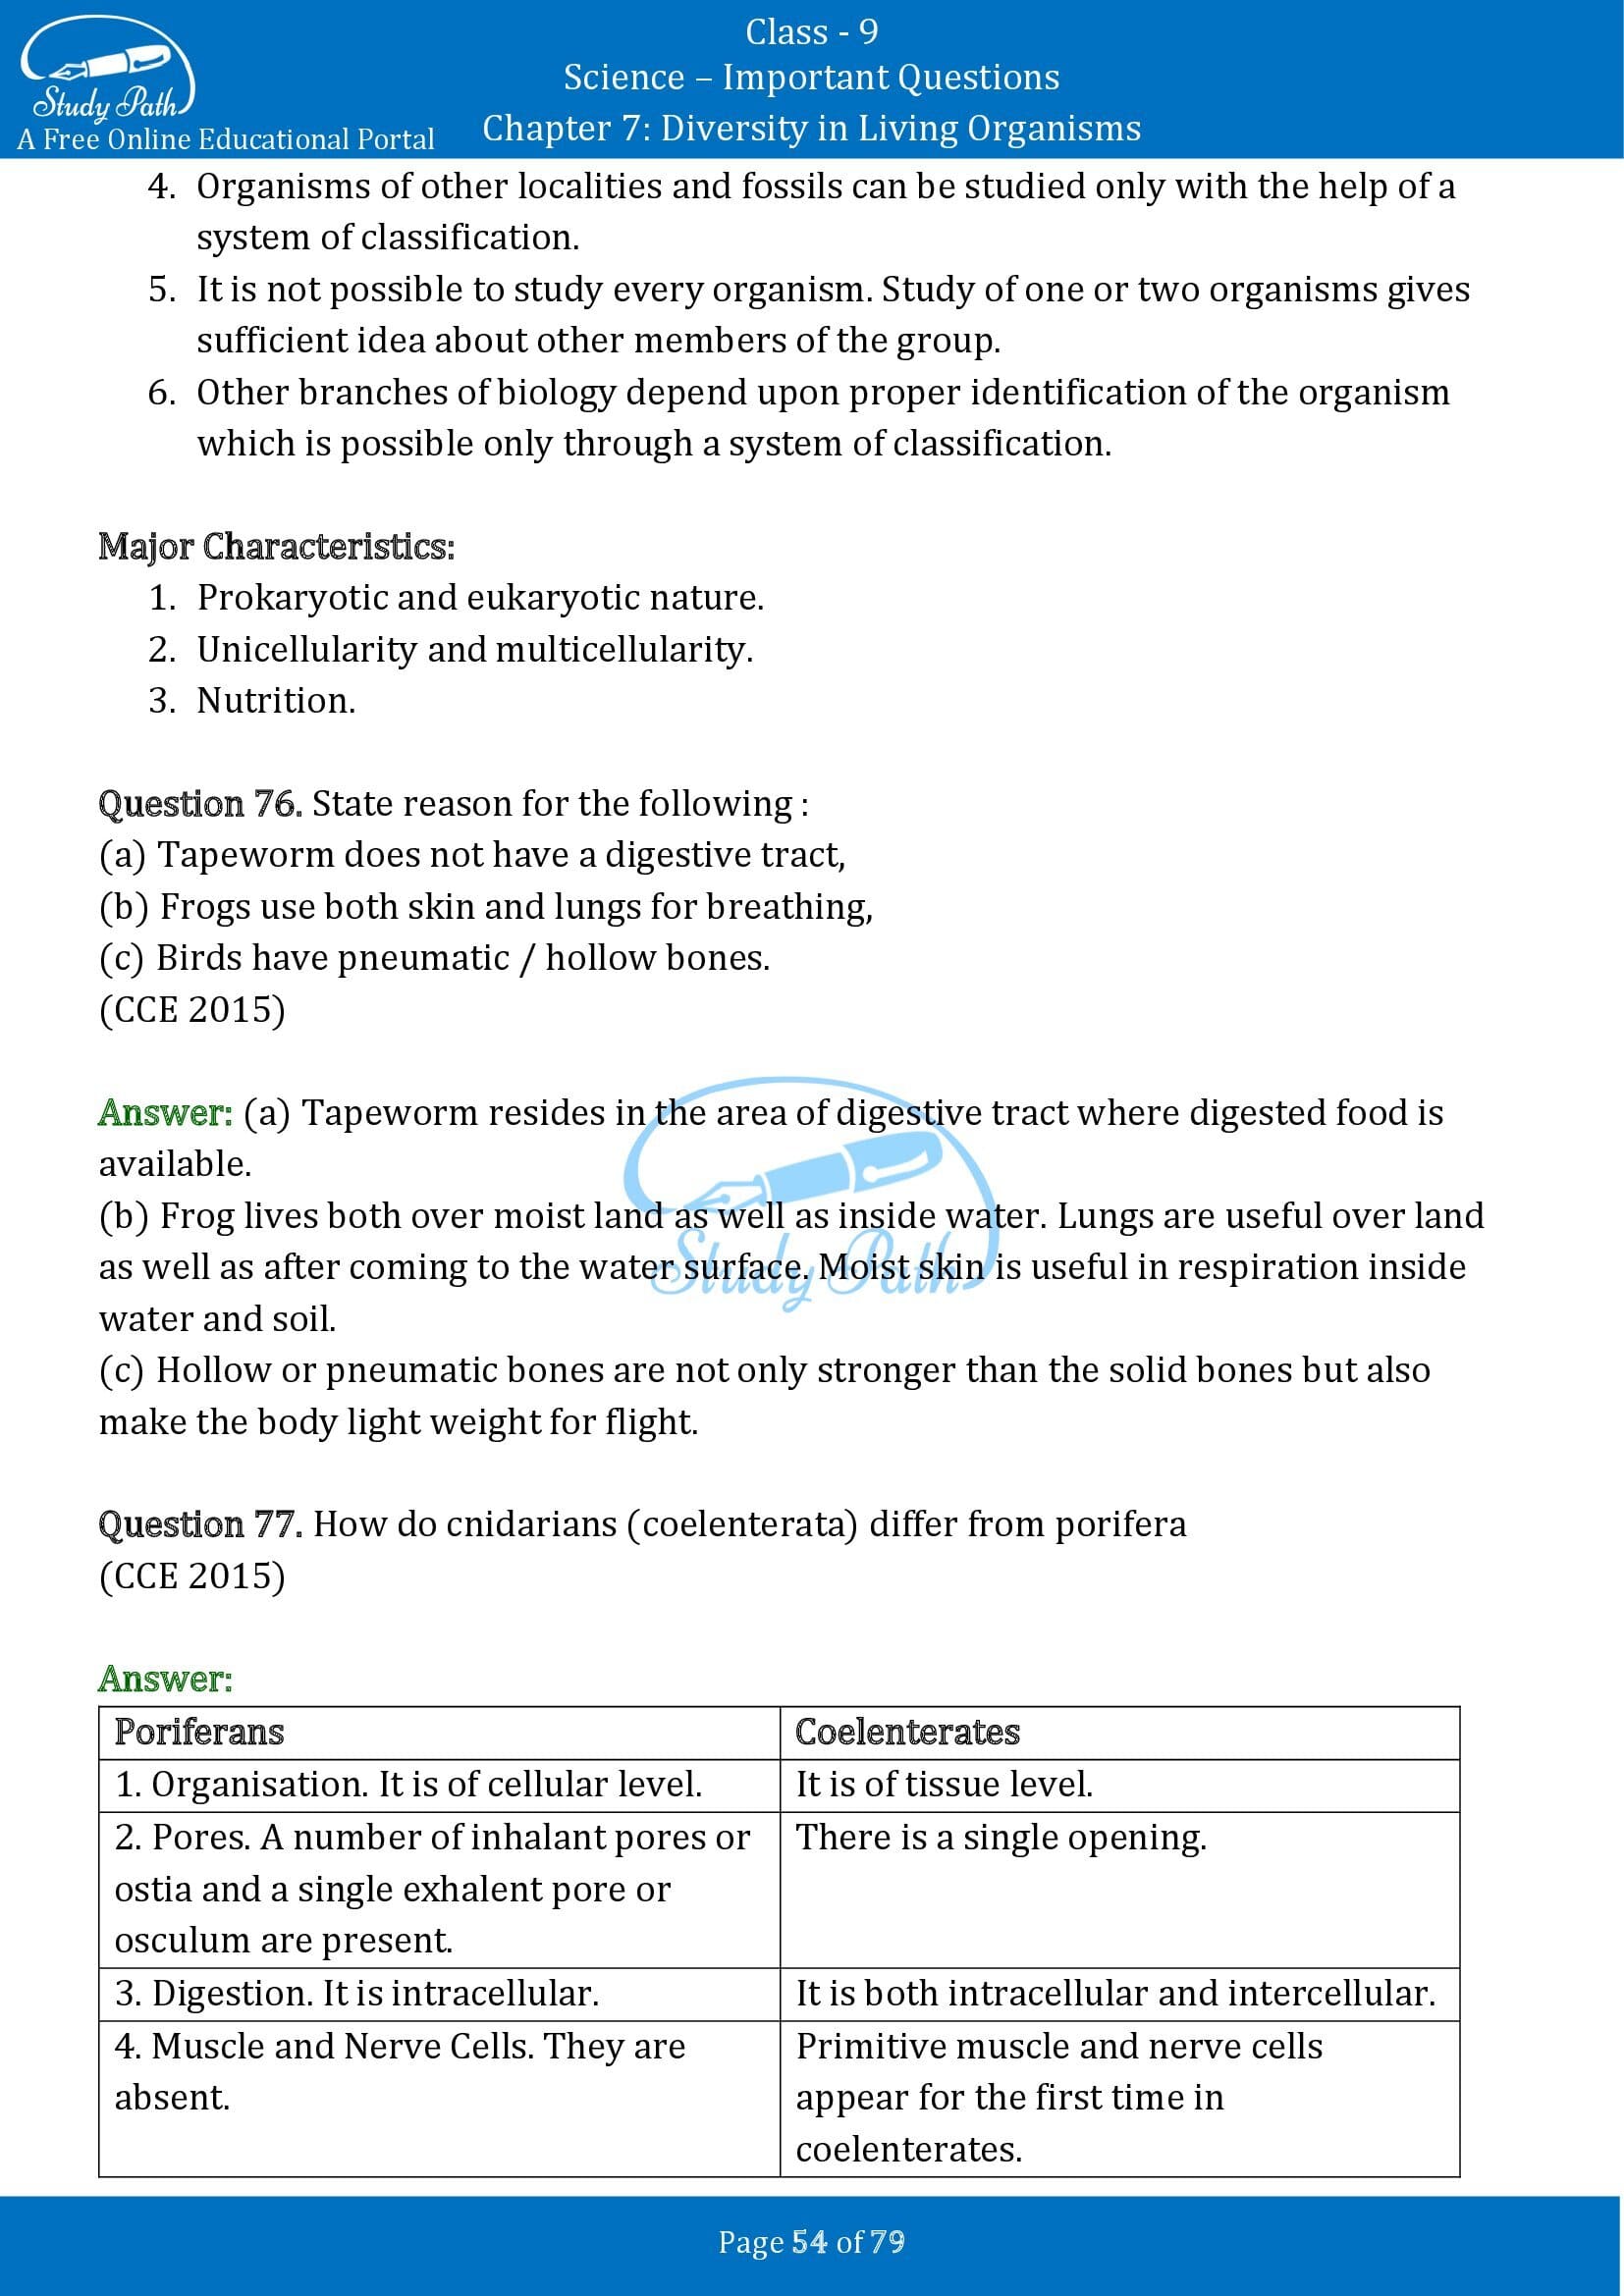 Important Questions for Class 9 Science Chapter 7 Diversity in Living Organisms 00054